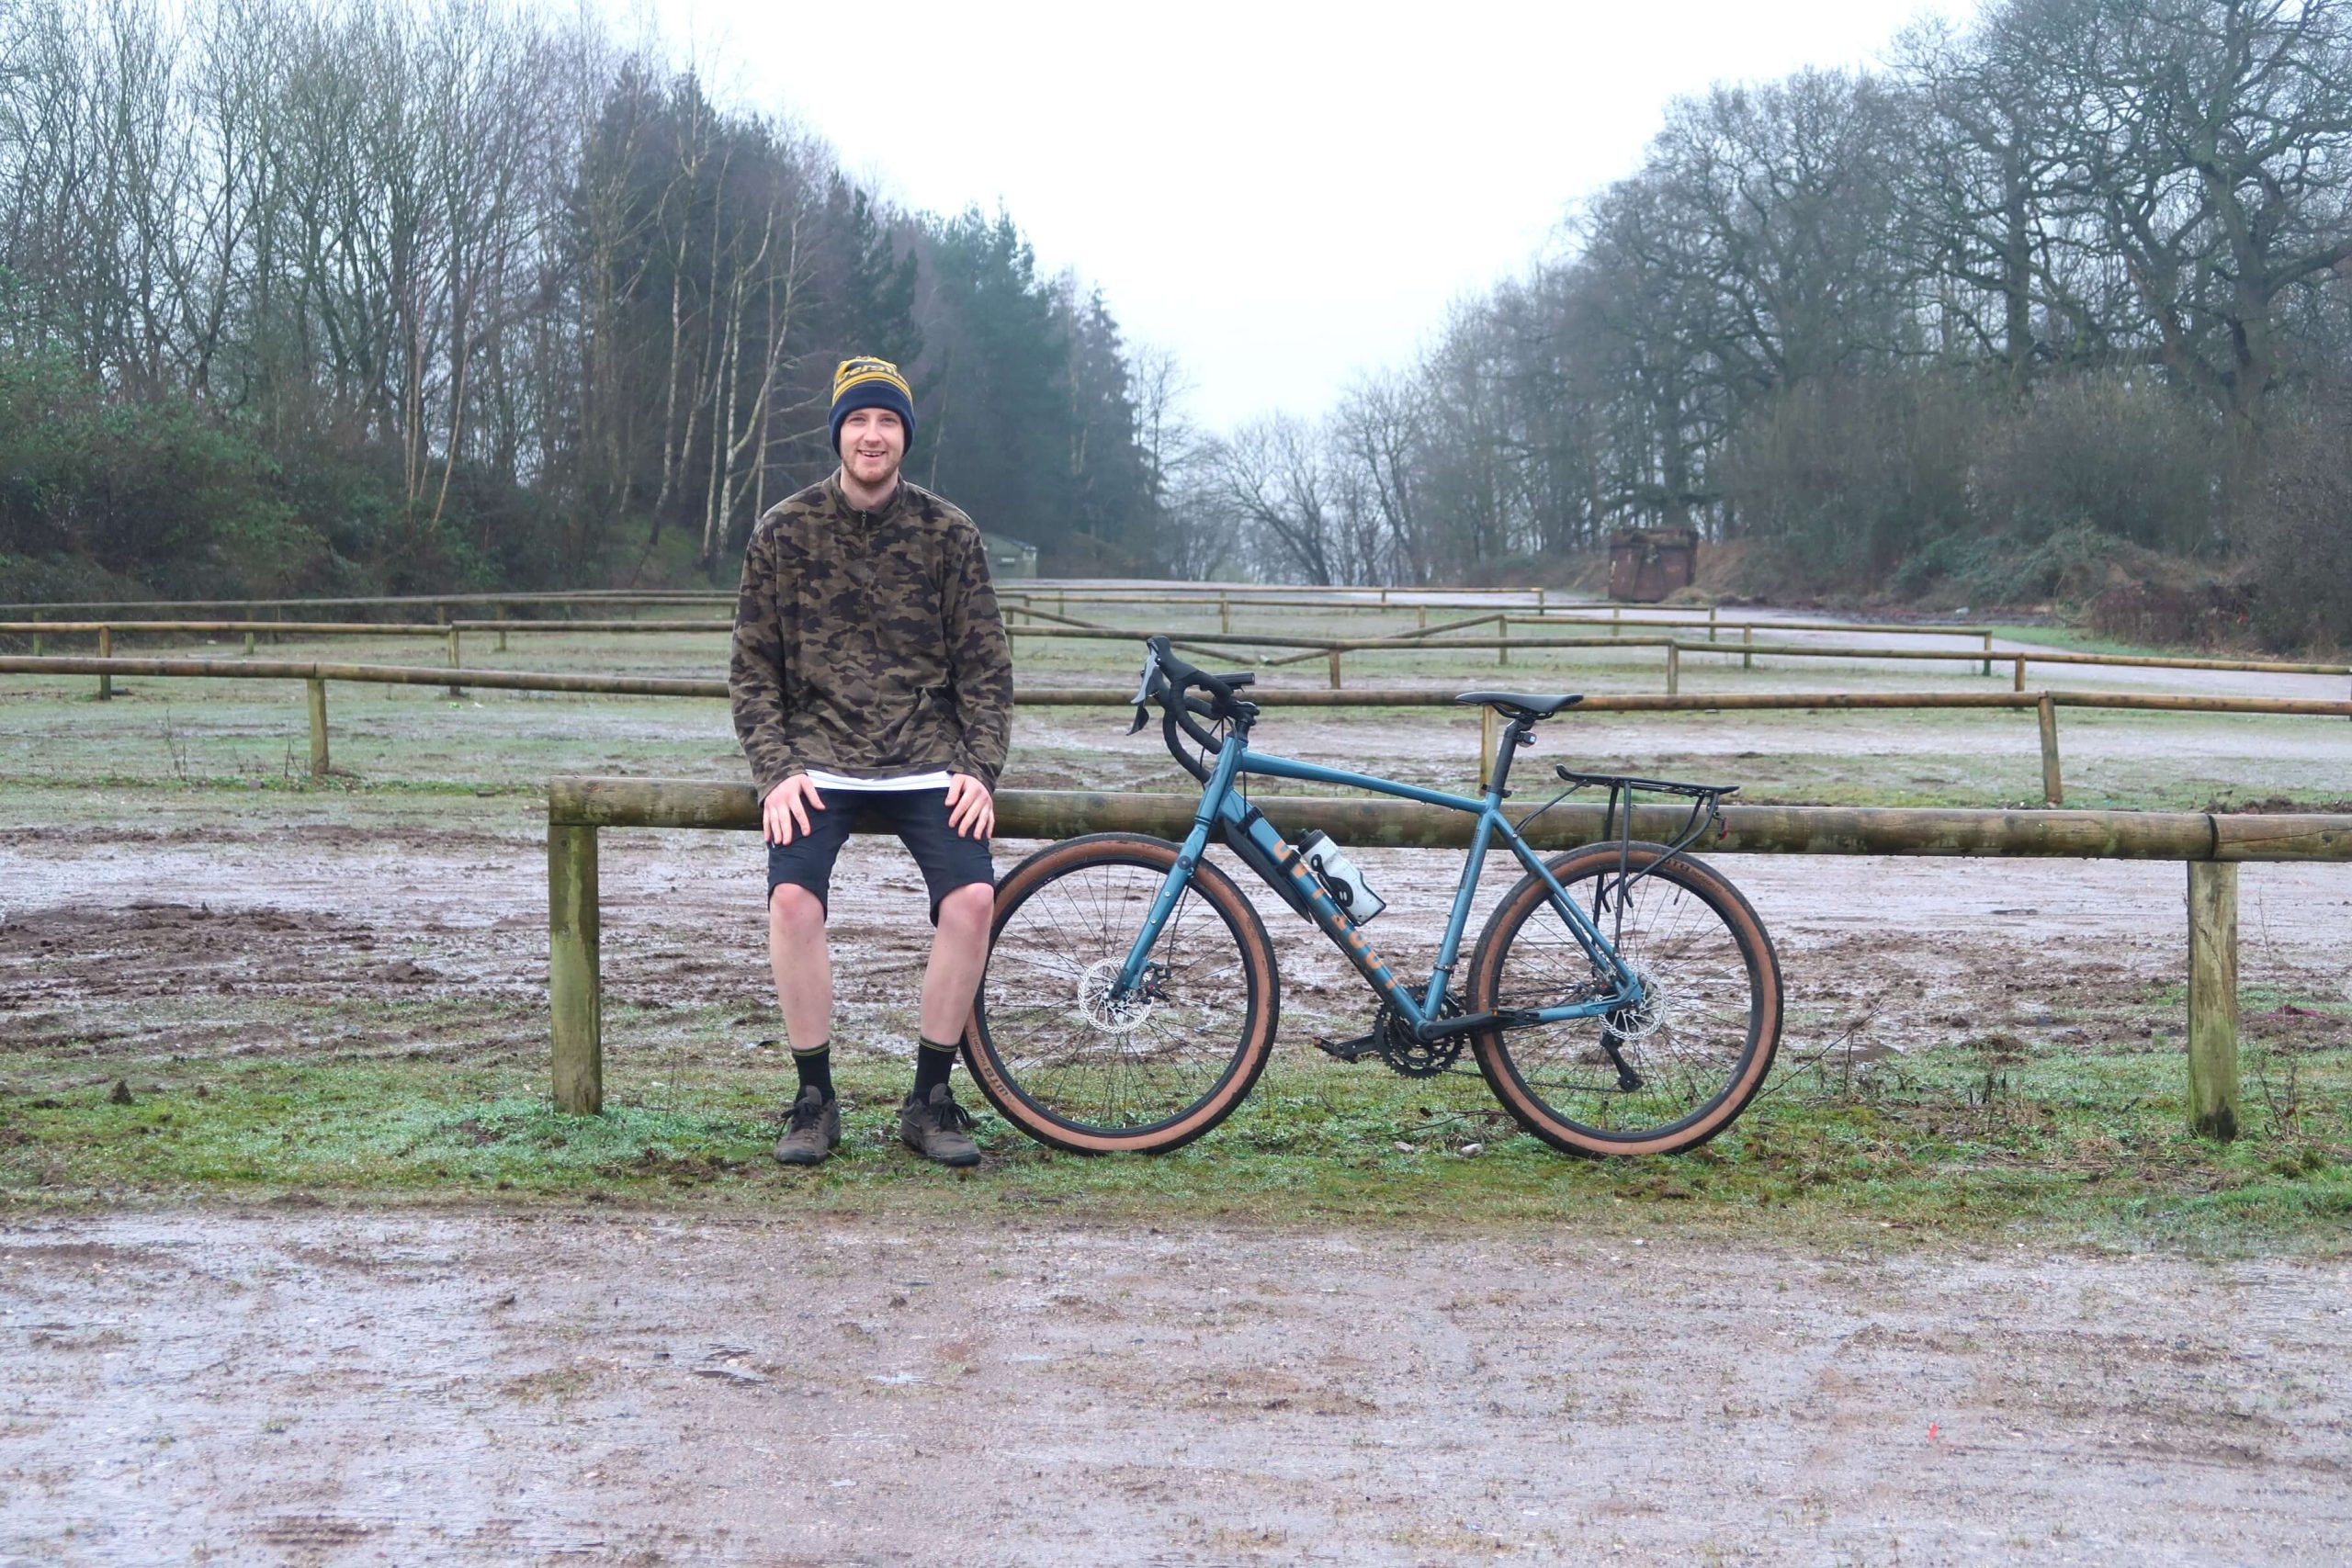 Former Derventio resident taking on epic bike ride to raise money featured image